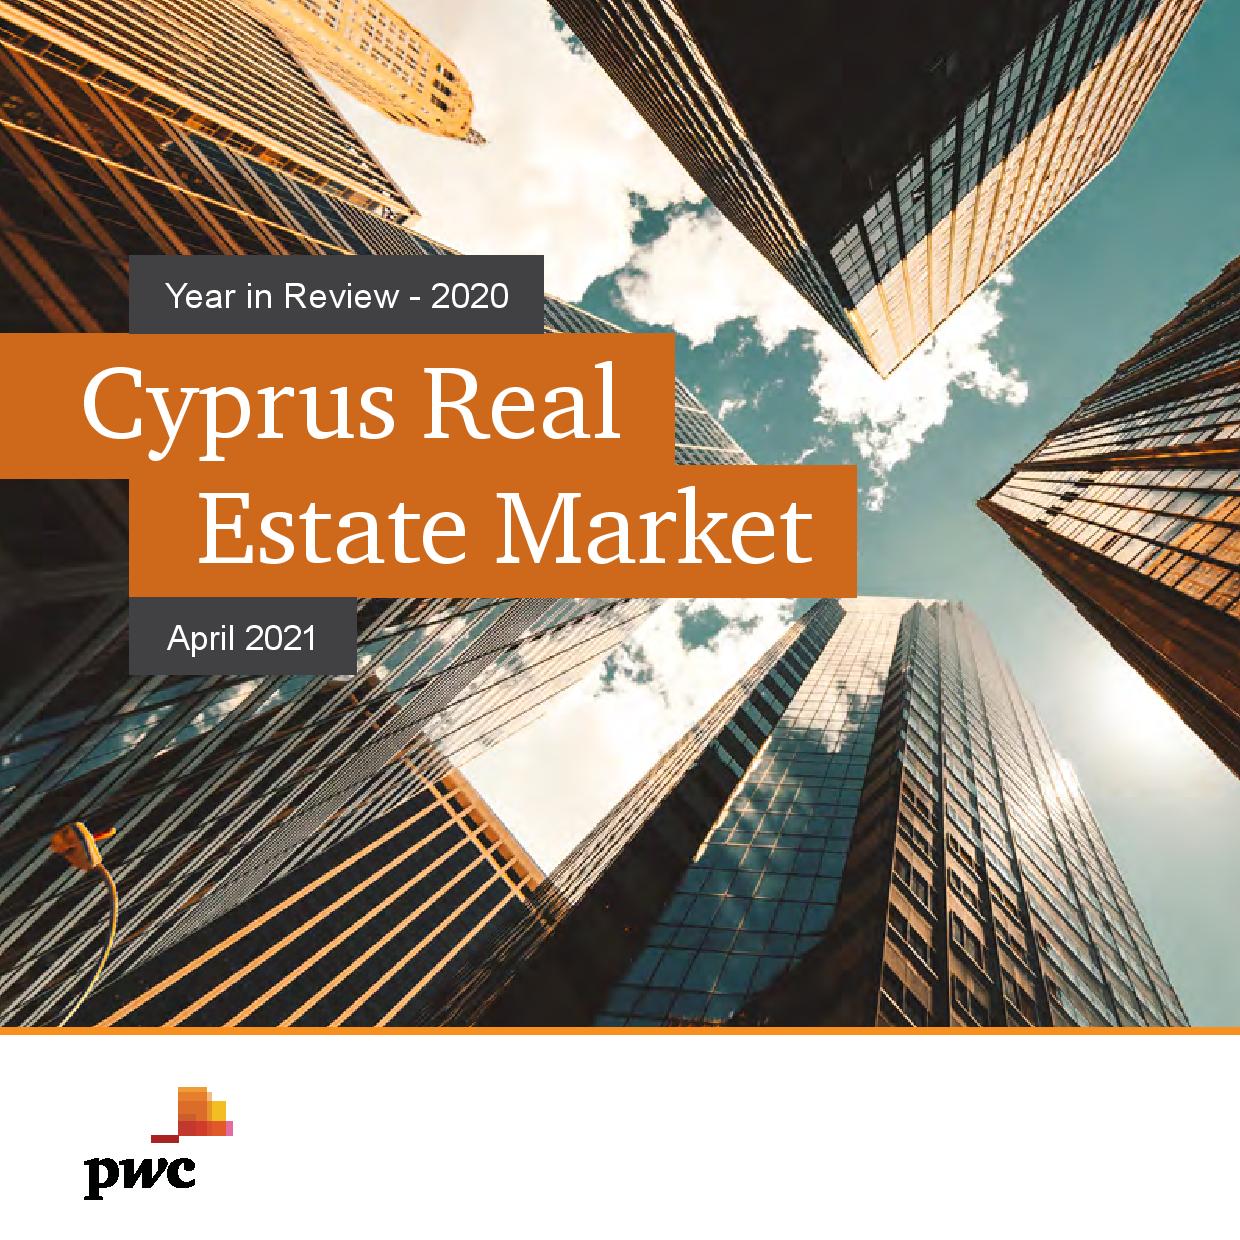 PwC: Cyprus Real Estate Market - Year in Review 2020